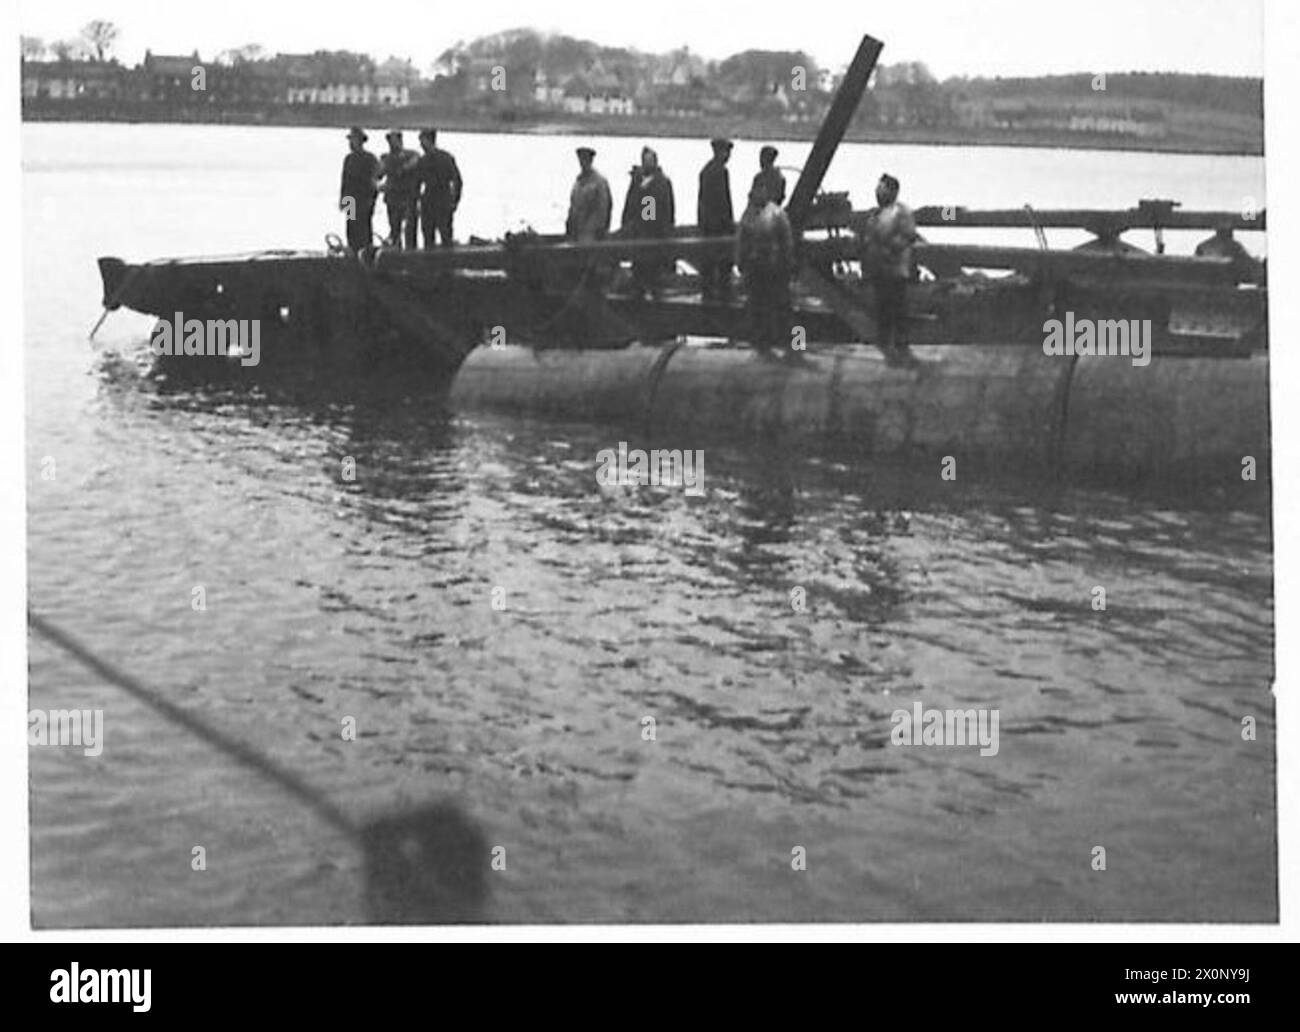 SPECIAL ASSIGNMENT D.T.N. - Photographs showing the operation of getting the first span away from the rocks. Operation was successful and the span was towed to Garlieston quayside. Photographic negative , British Army Stock Photo